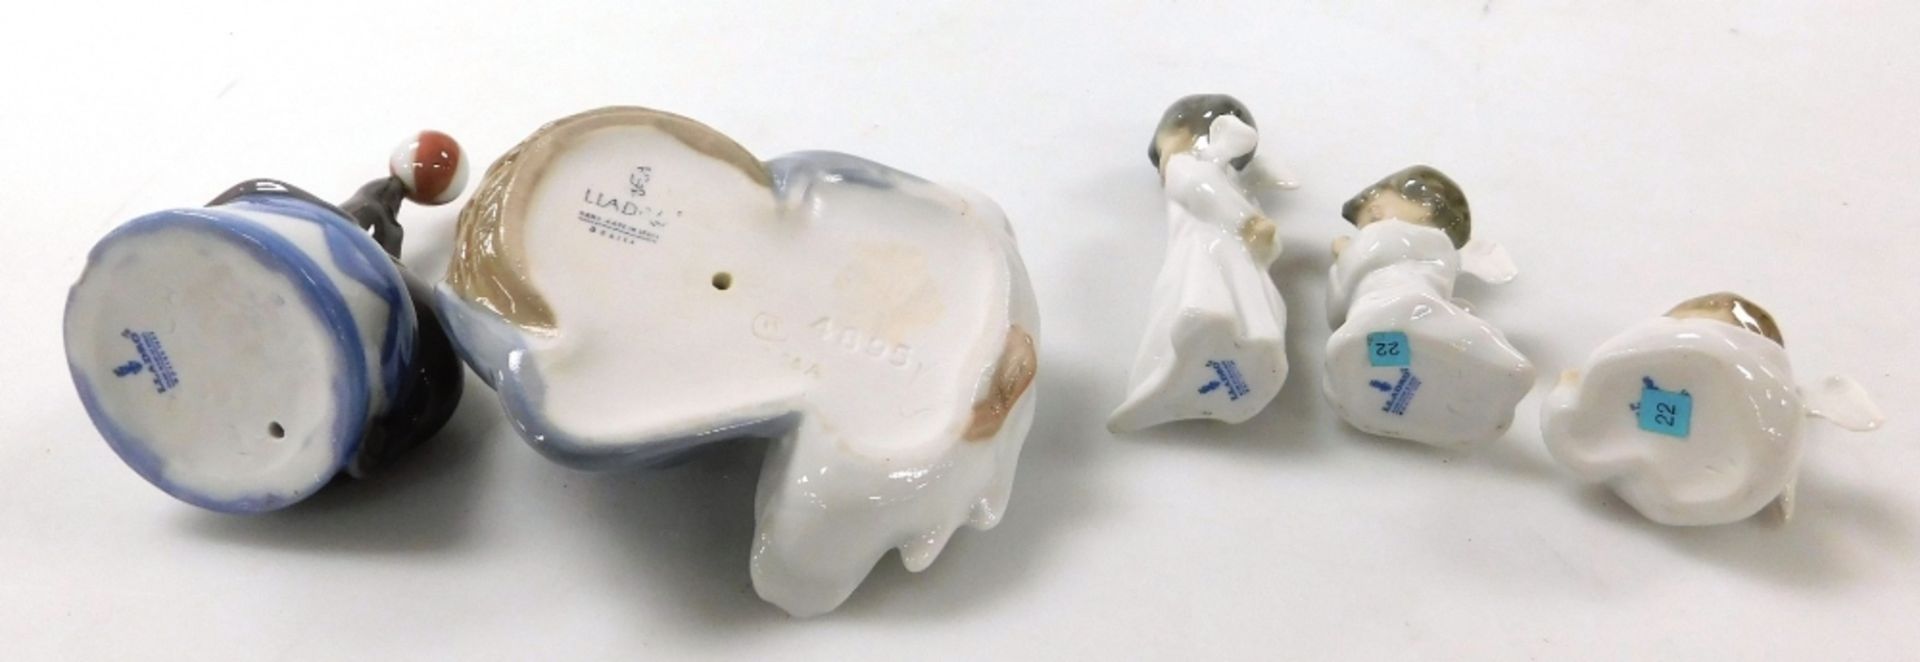 Three Lladro porcelain cherub Christmas ornaments, a Lladro porcelain figure of a seal with a ball, - Image 2 of 2